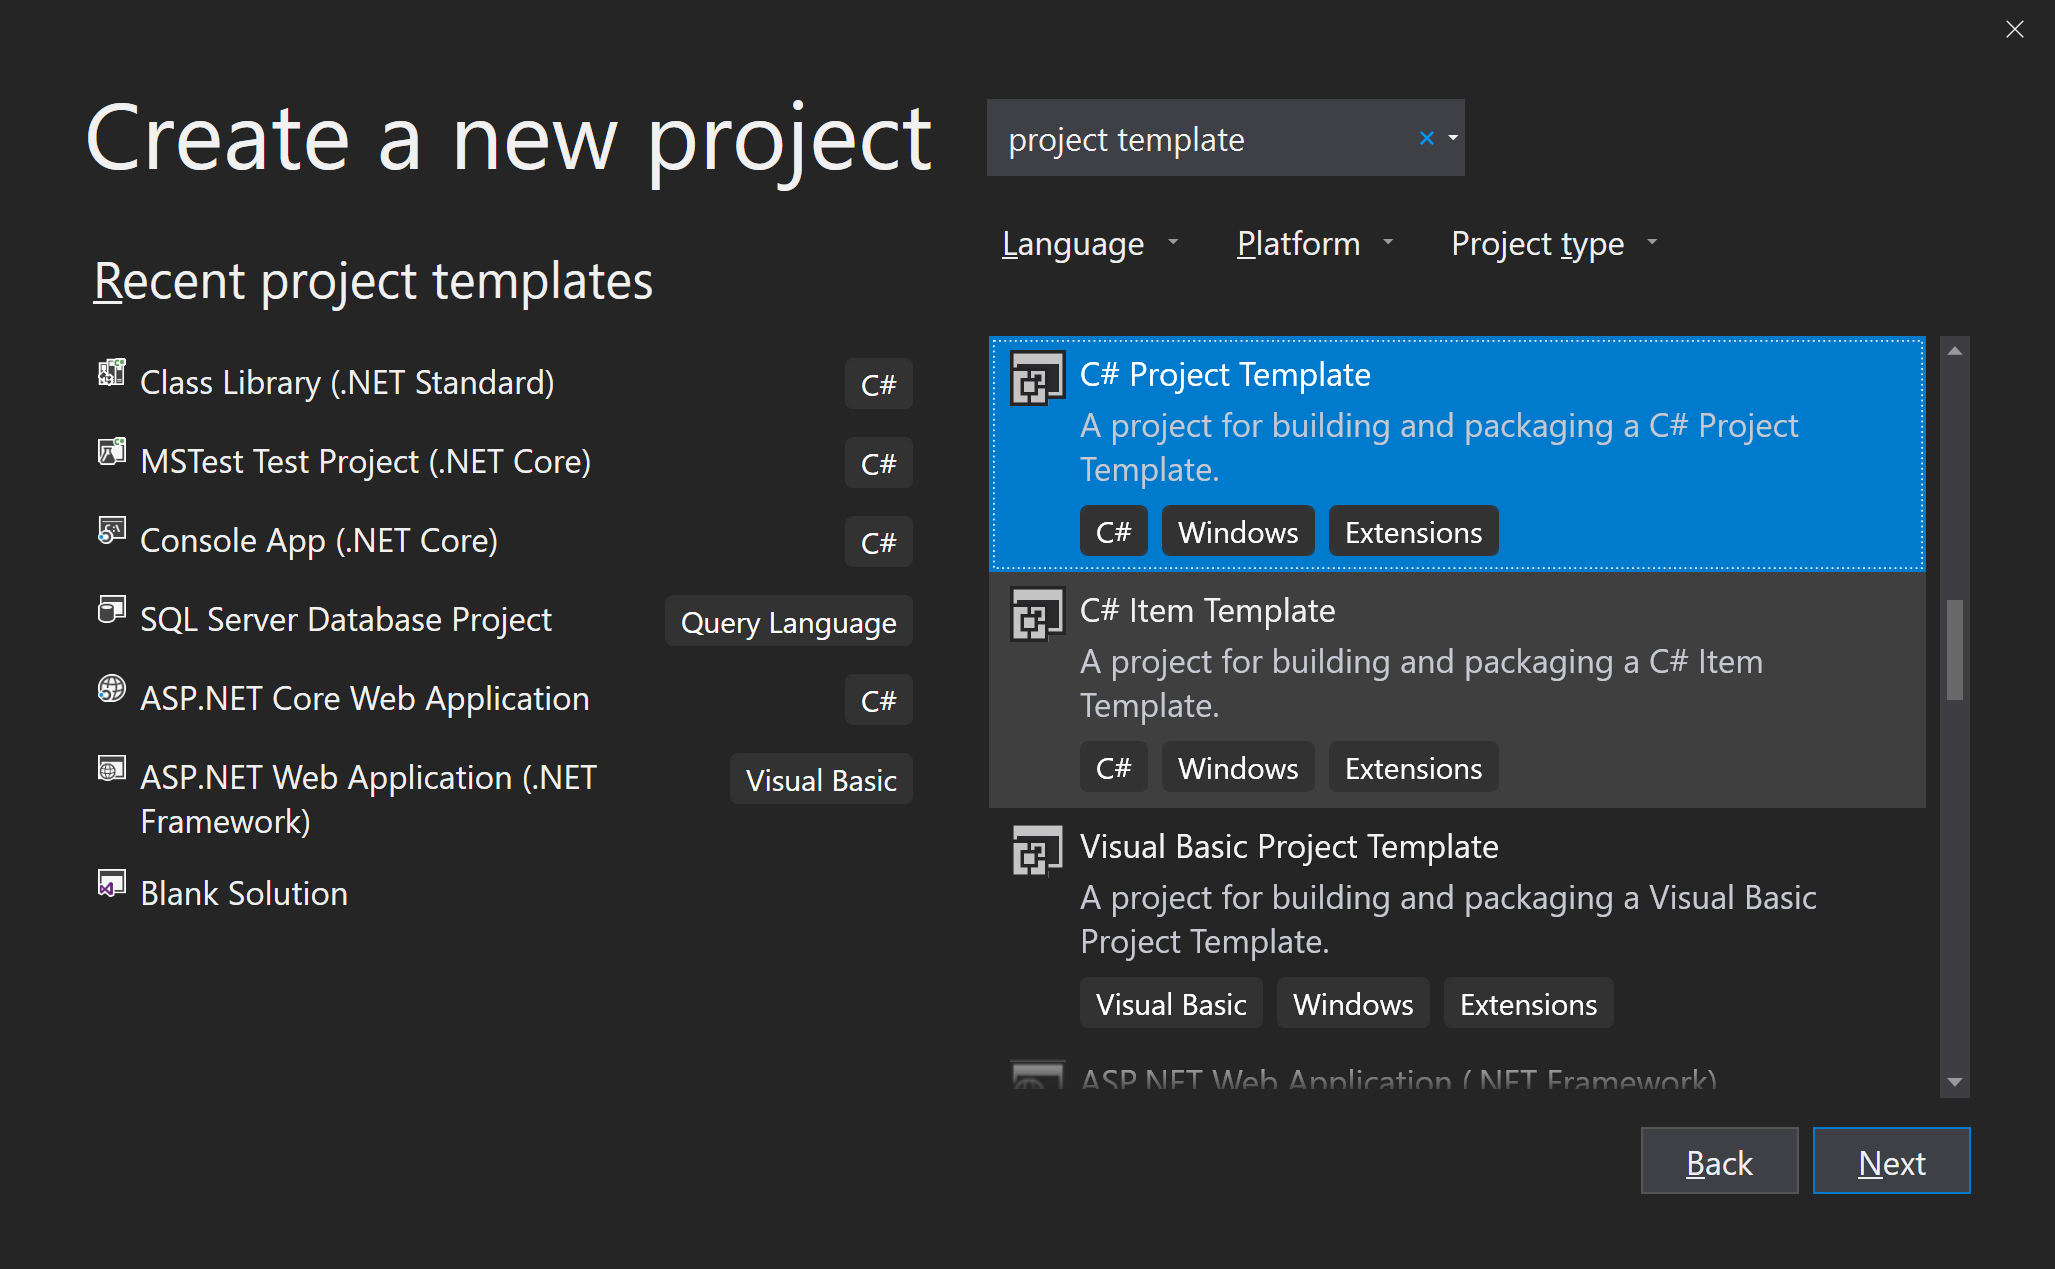 Screenshot of project template project selection.